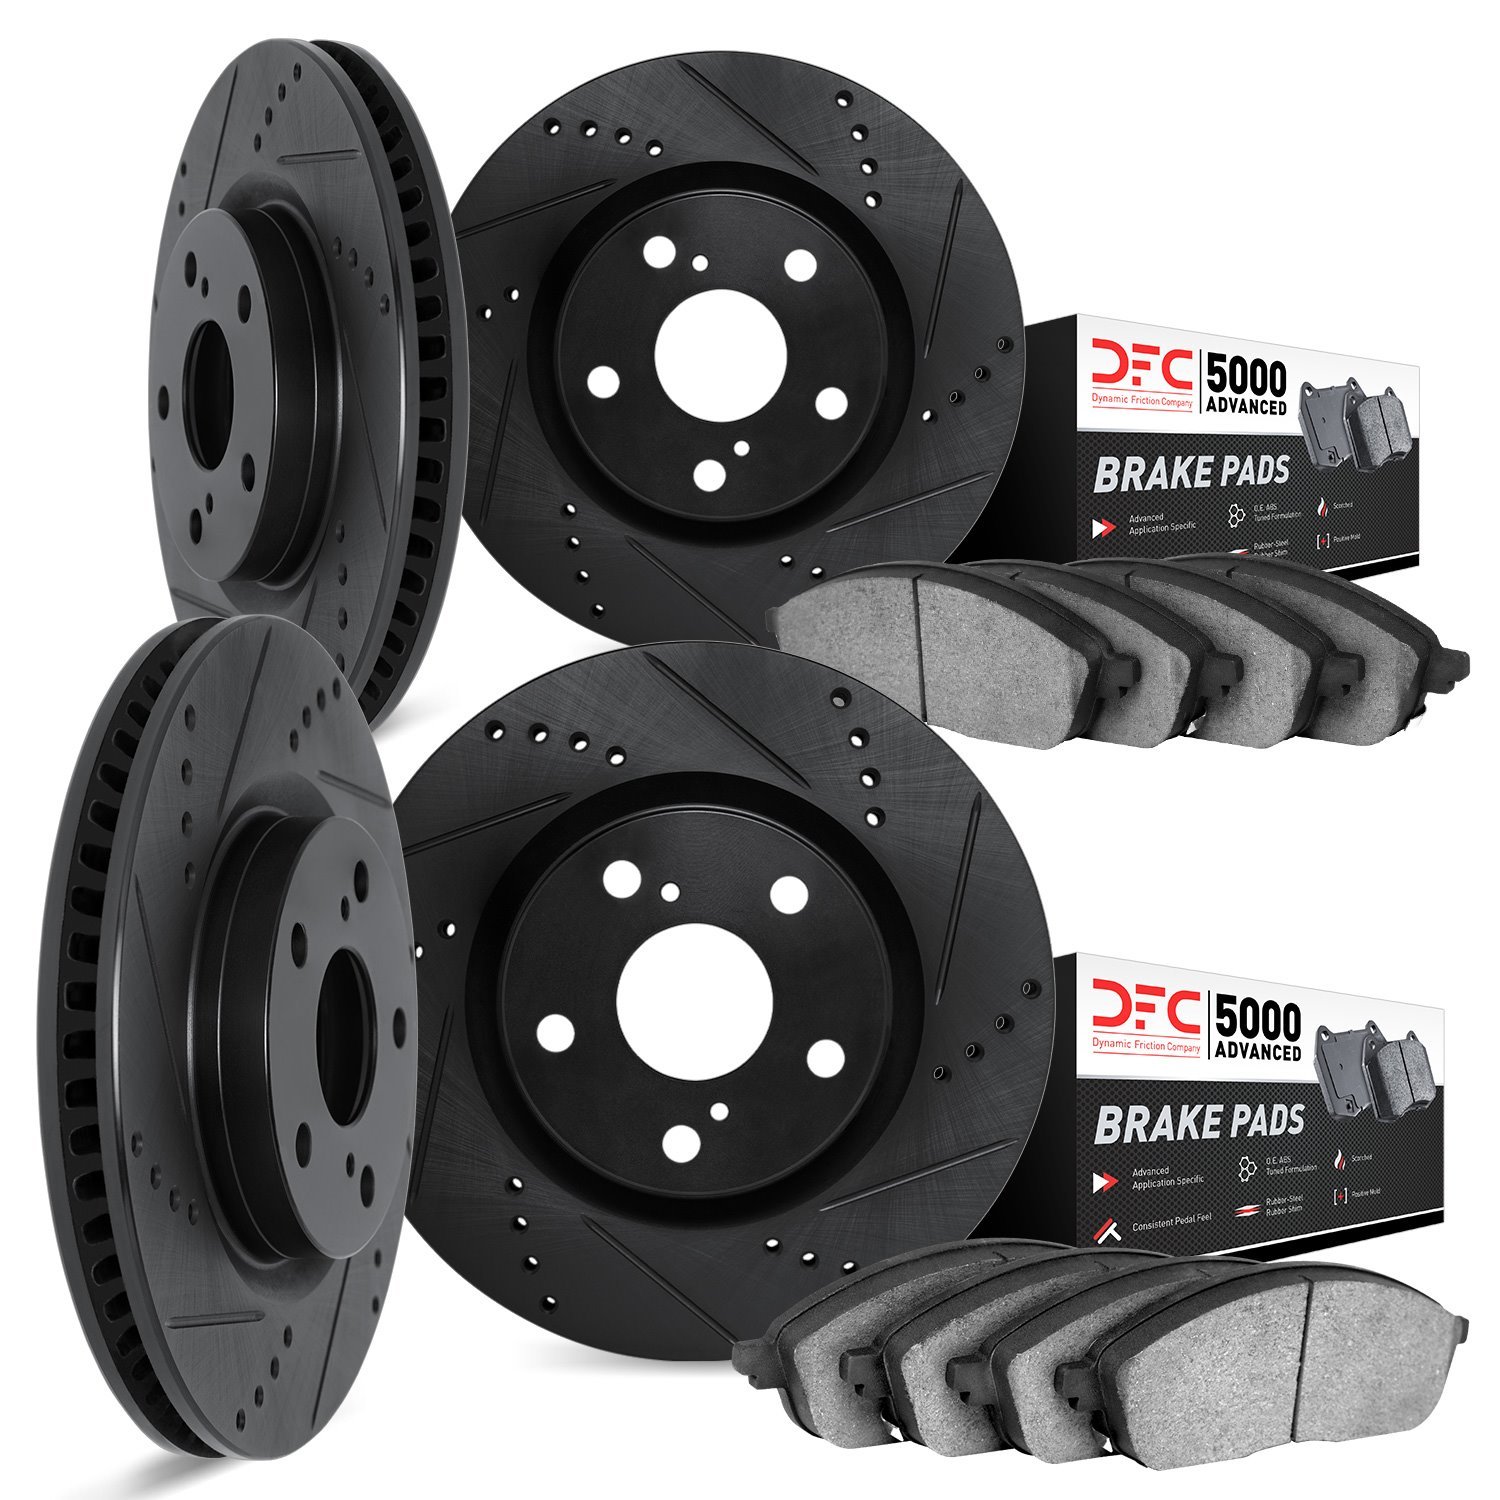 8504-02011 Drilled/Slotted Brake Rotors w/5000 Advanced Brake Pads Kit [Black], 1989-1997 Porsche, Position: Front and Rear